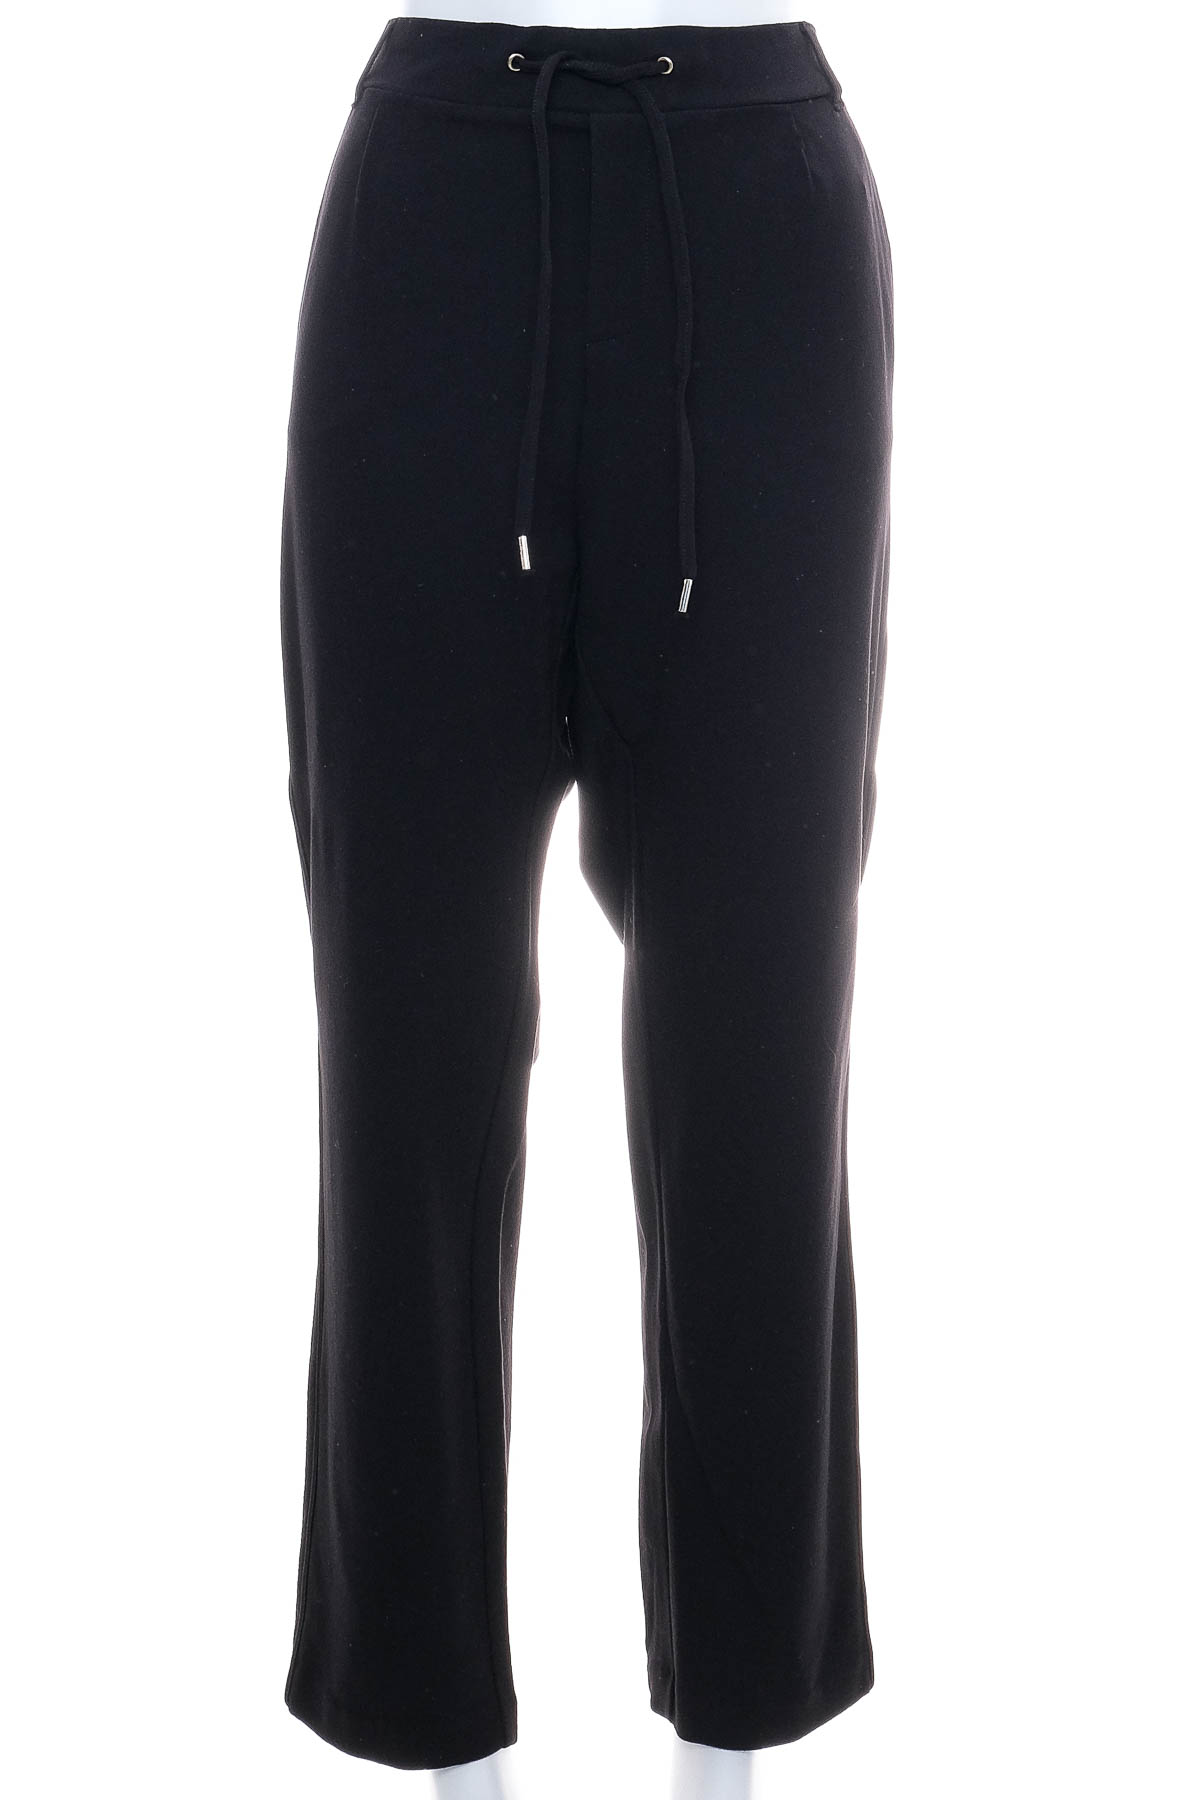 Women's trousers - S.Oliver - 0